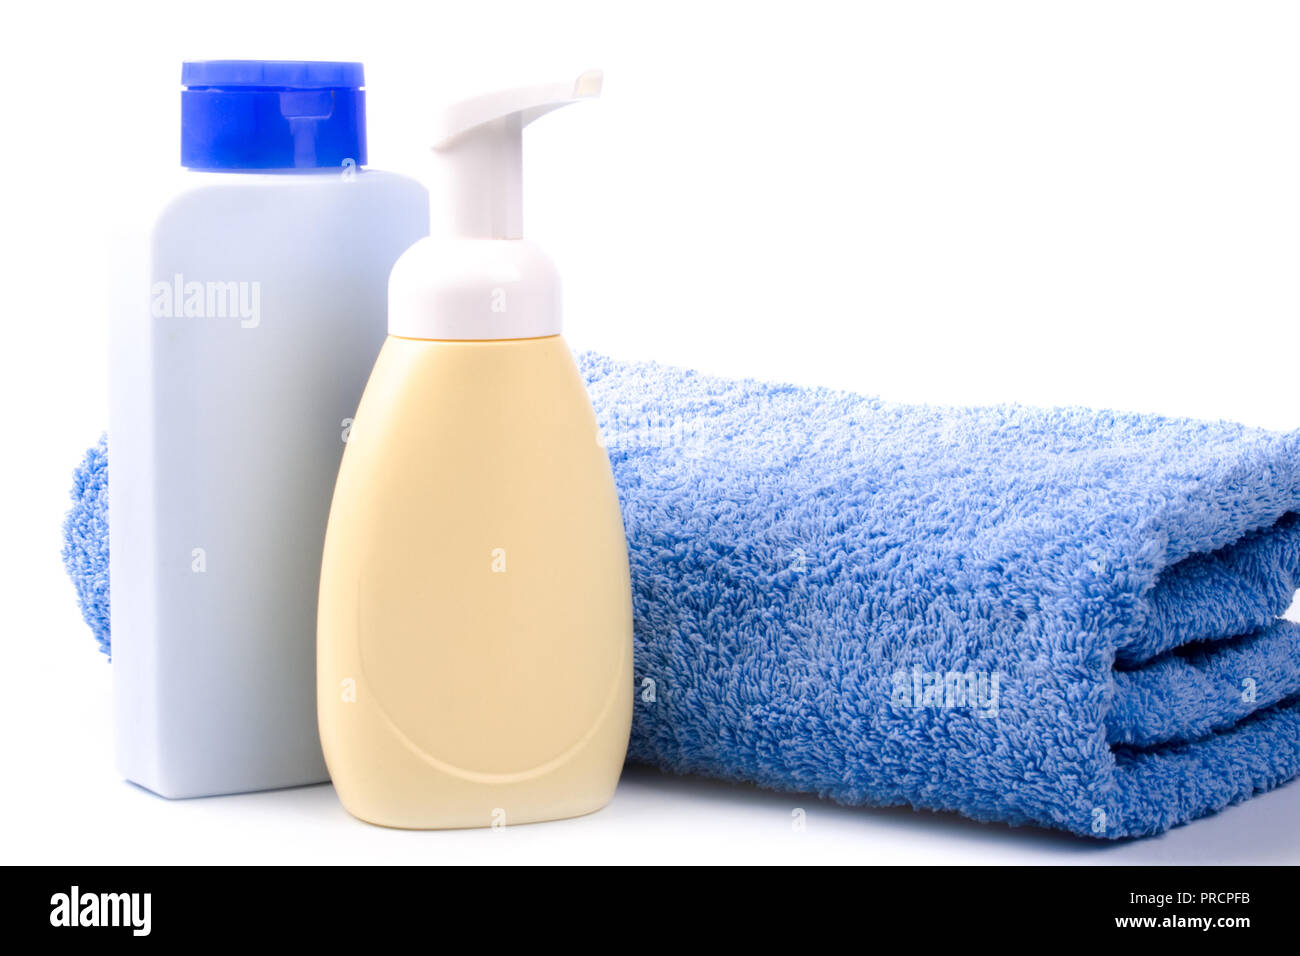 https://c8.alamy.com/comp/PRCPFB/body-care-products-and-towel-on-white-background-PRCPFB.jpg